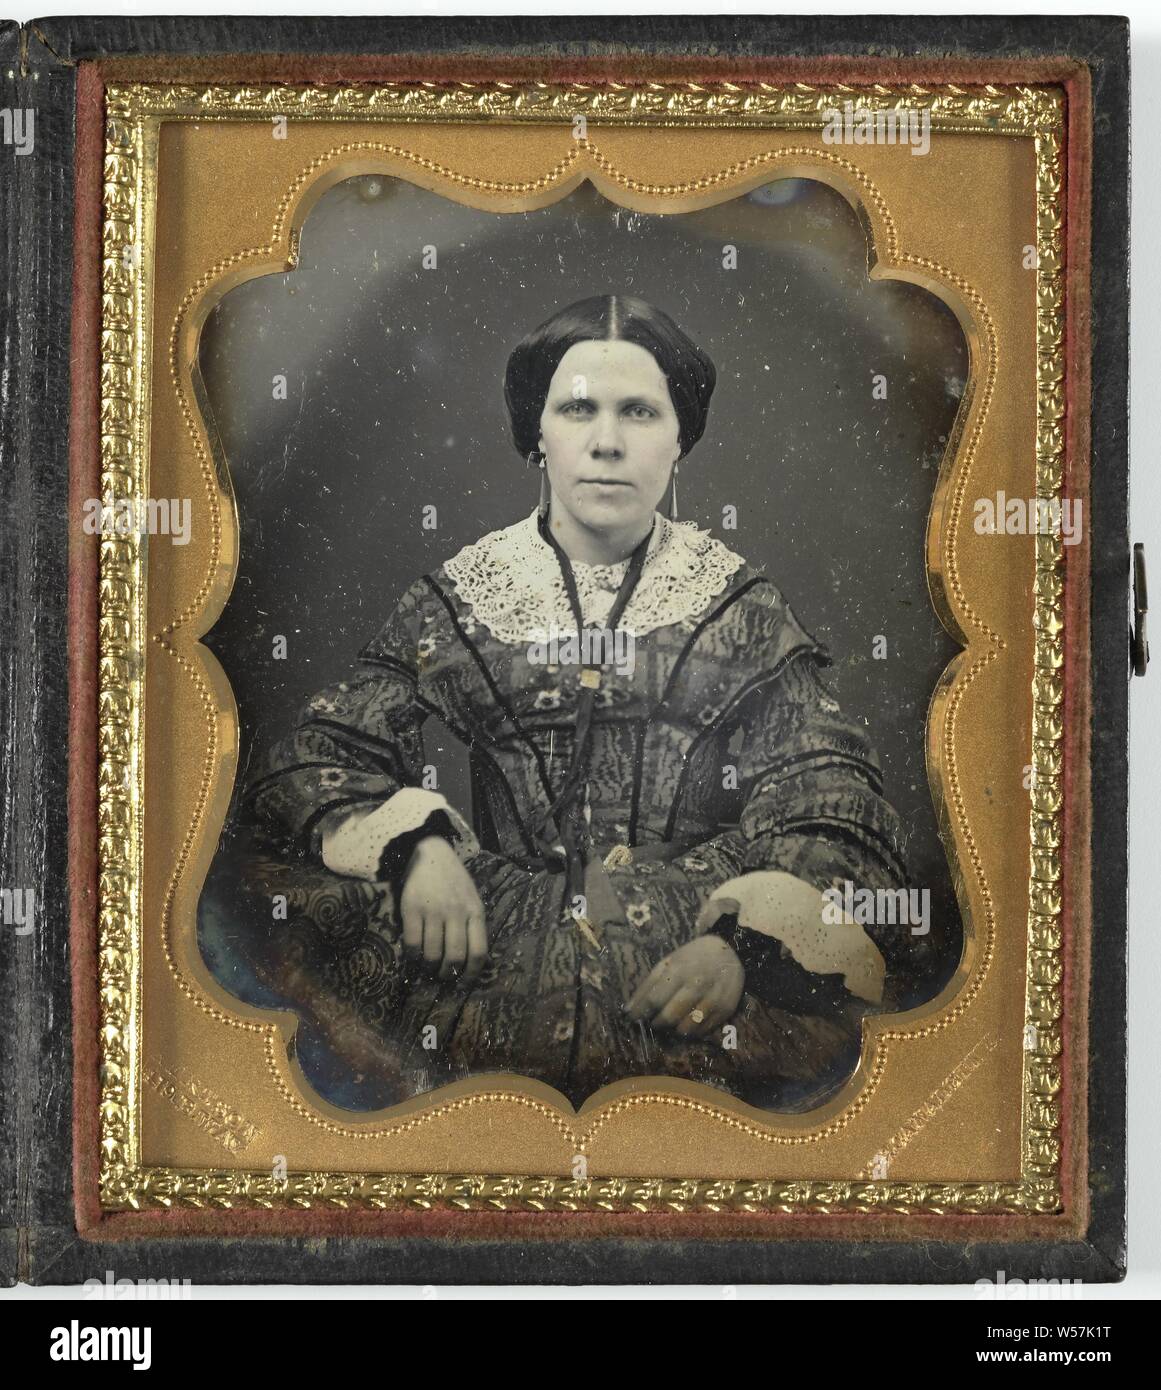 Portrait of an unknown woman, historical persons, adult woman, M. Kertson, 1840 - 1860, copper (metal), glass, leather, velvet (fabric weave), h 68 mm × w 50 mm h 93 mm × w 81 mm × t 13 mm Stock Photo